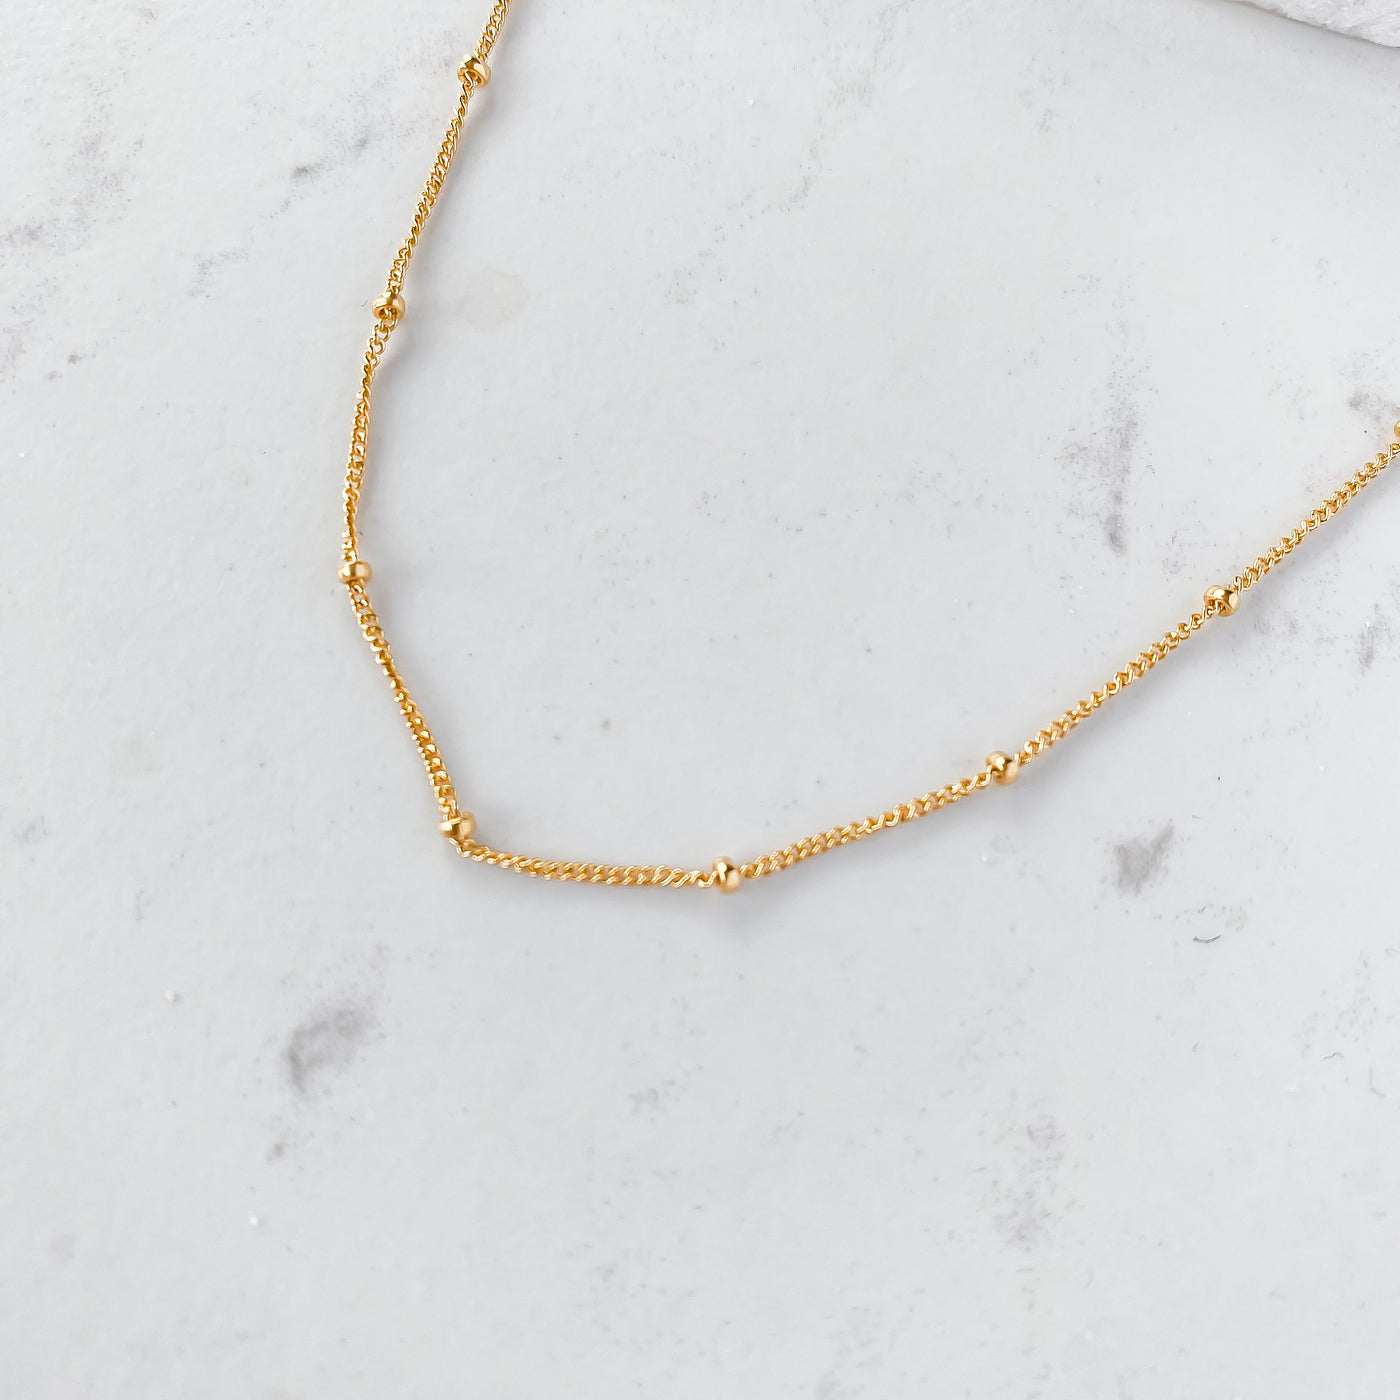 Gold Filled Satellite Cable Chain Necklace